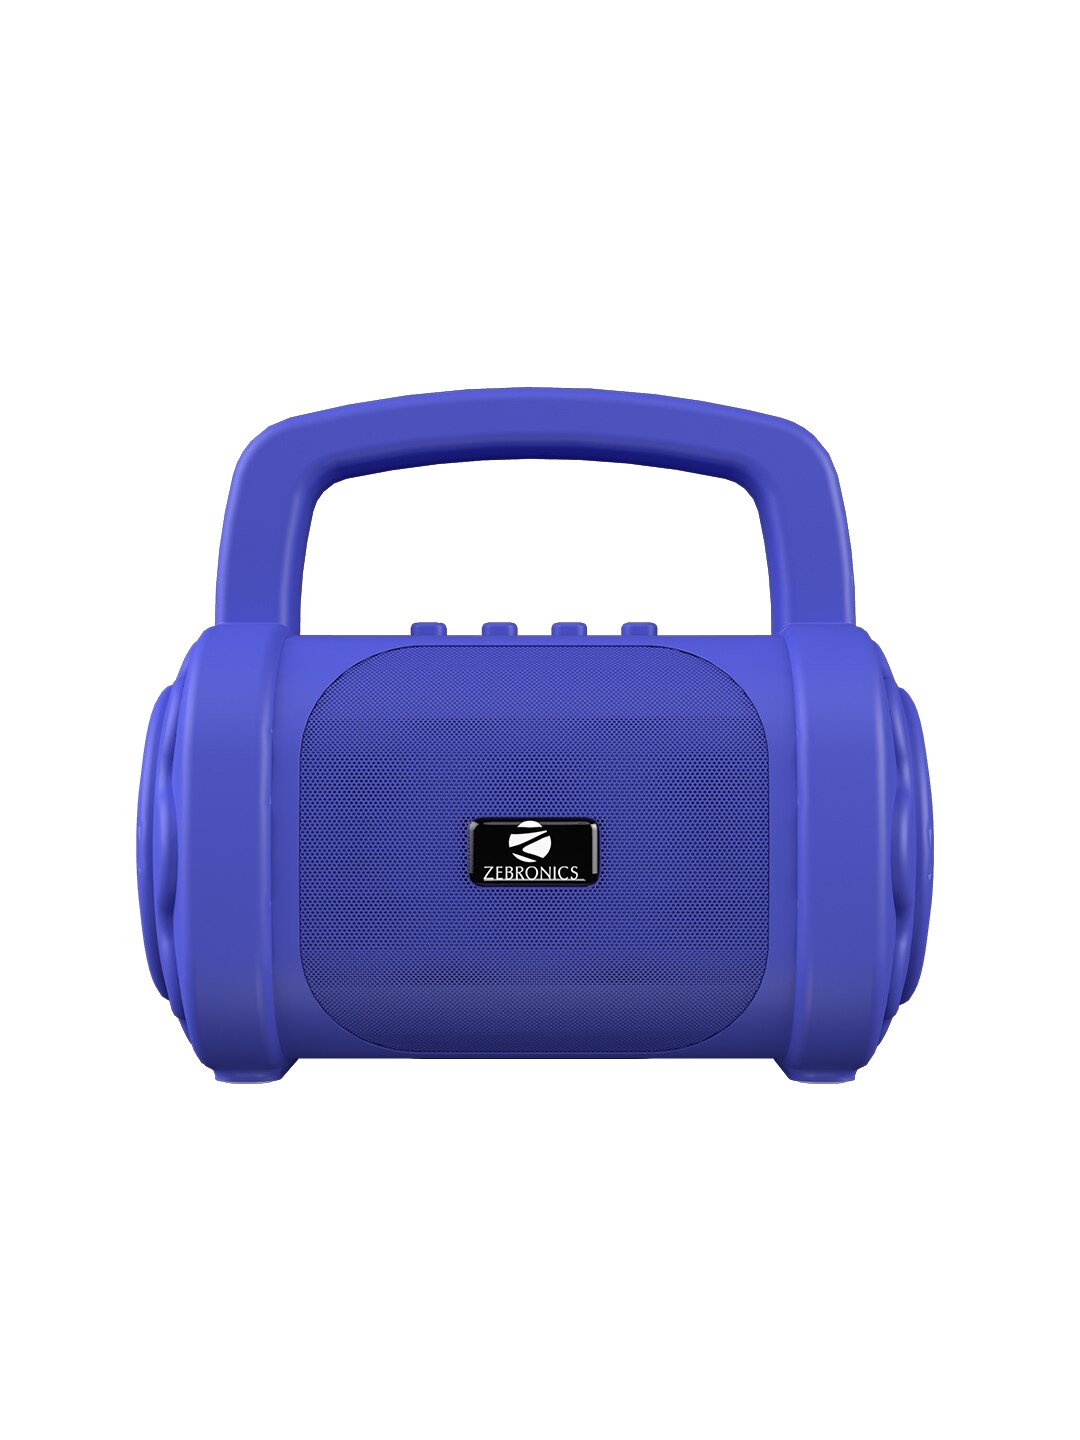 Zebronics Zeb-County 3 Portable Wireless Speaker Supporting Bluetooth v5.0 - Blue Price in India